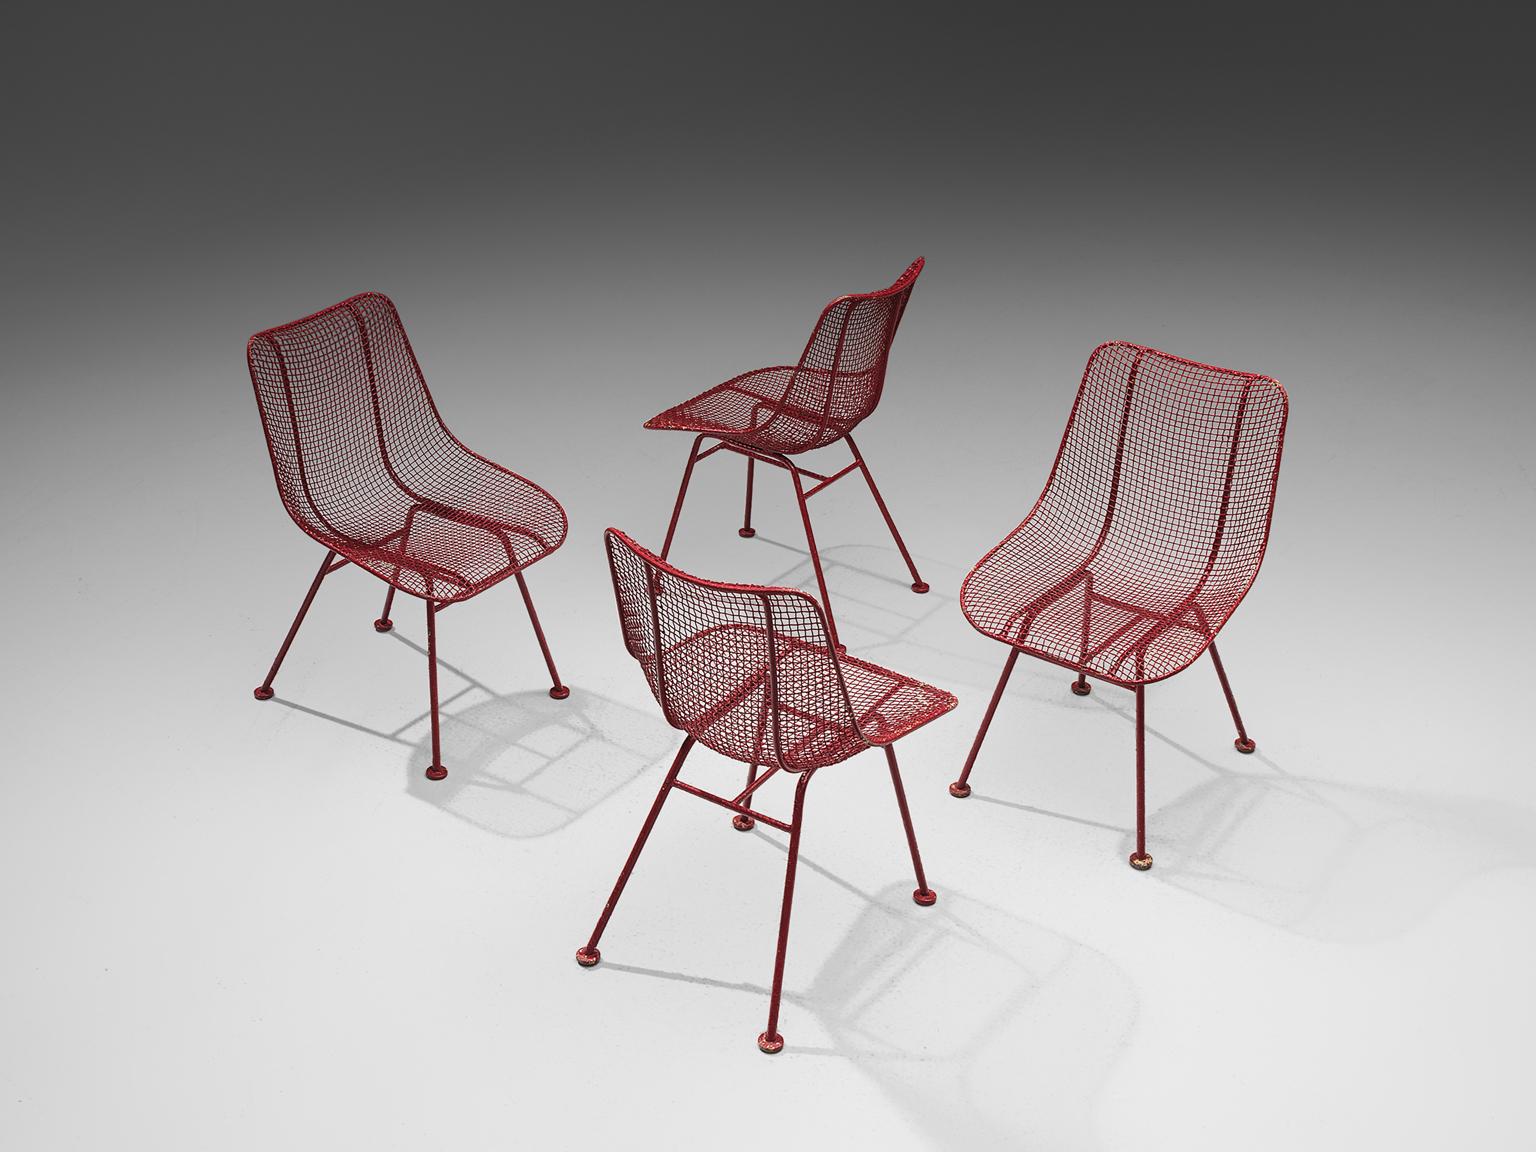 Russell Woodard 'Sculptura' patio chairs in wrought iron and red lacquer, United States, 1950s. 

These 'Sculptura' patio chairs, which can be used as dining chairs as well, are in iron and woven steel. The intertwined steel creates a mesh and